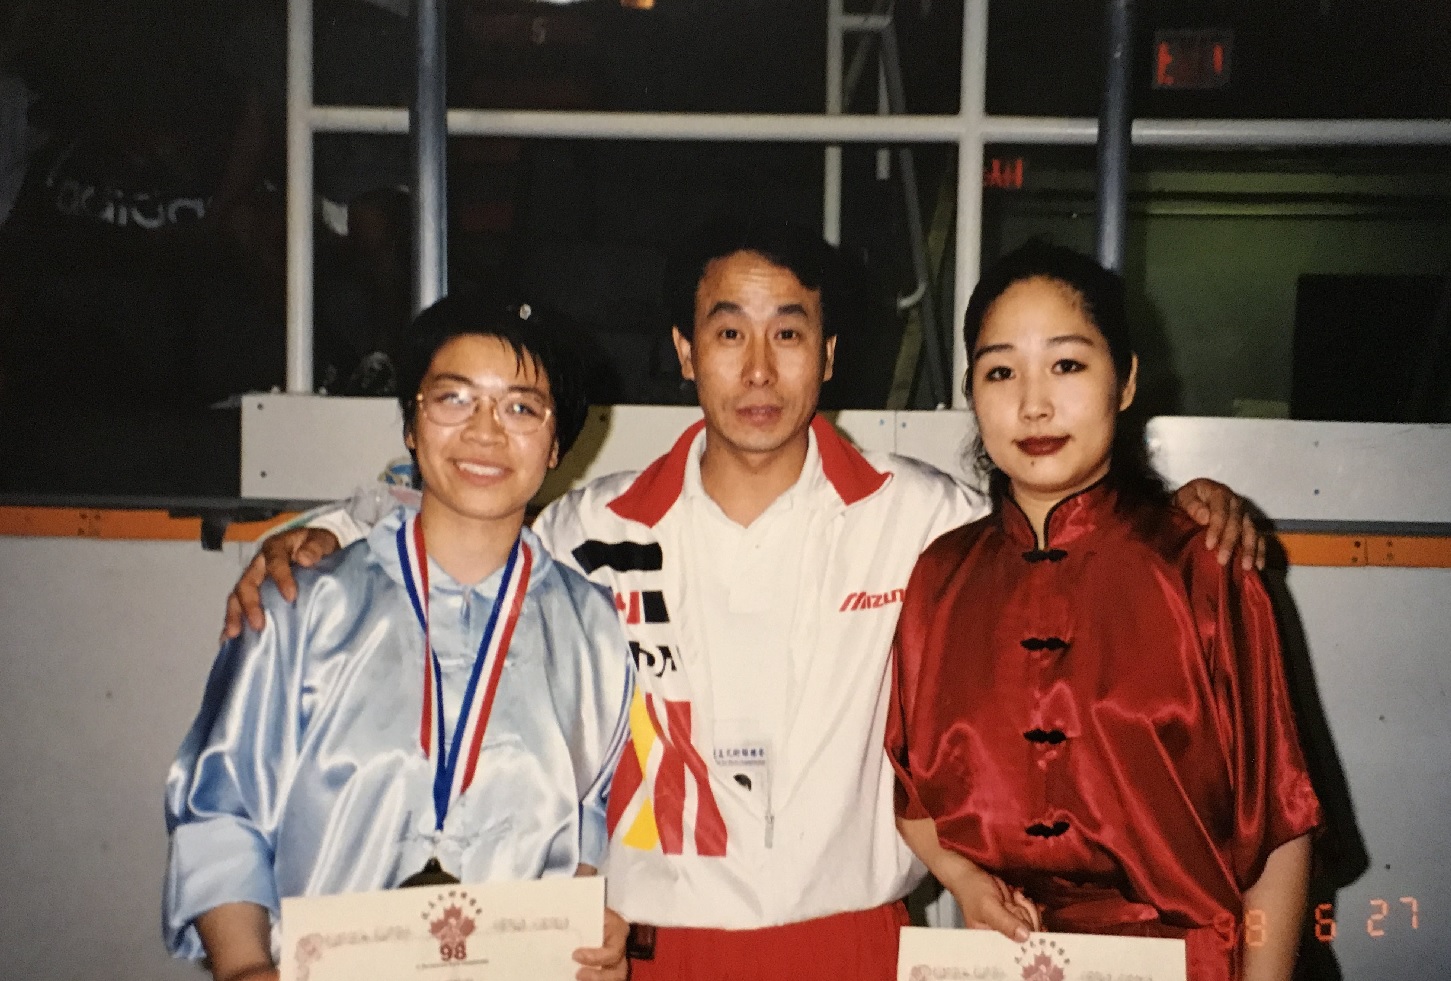 Champions and their coach, 1998